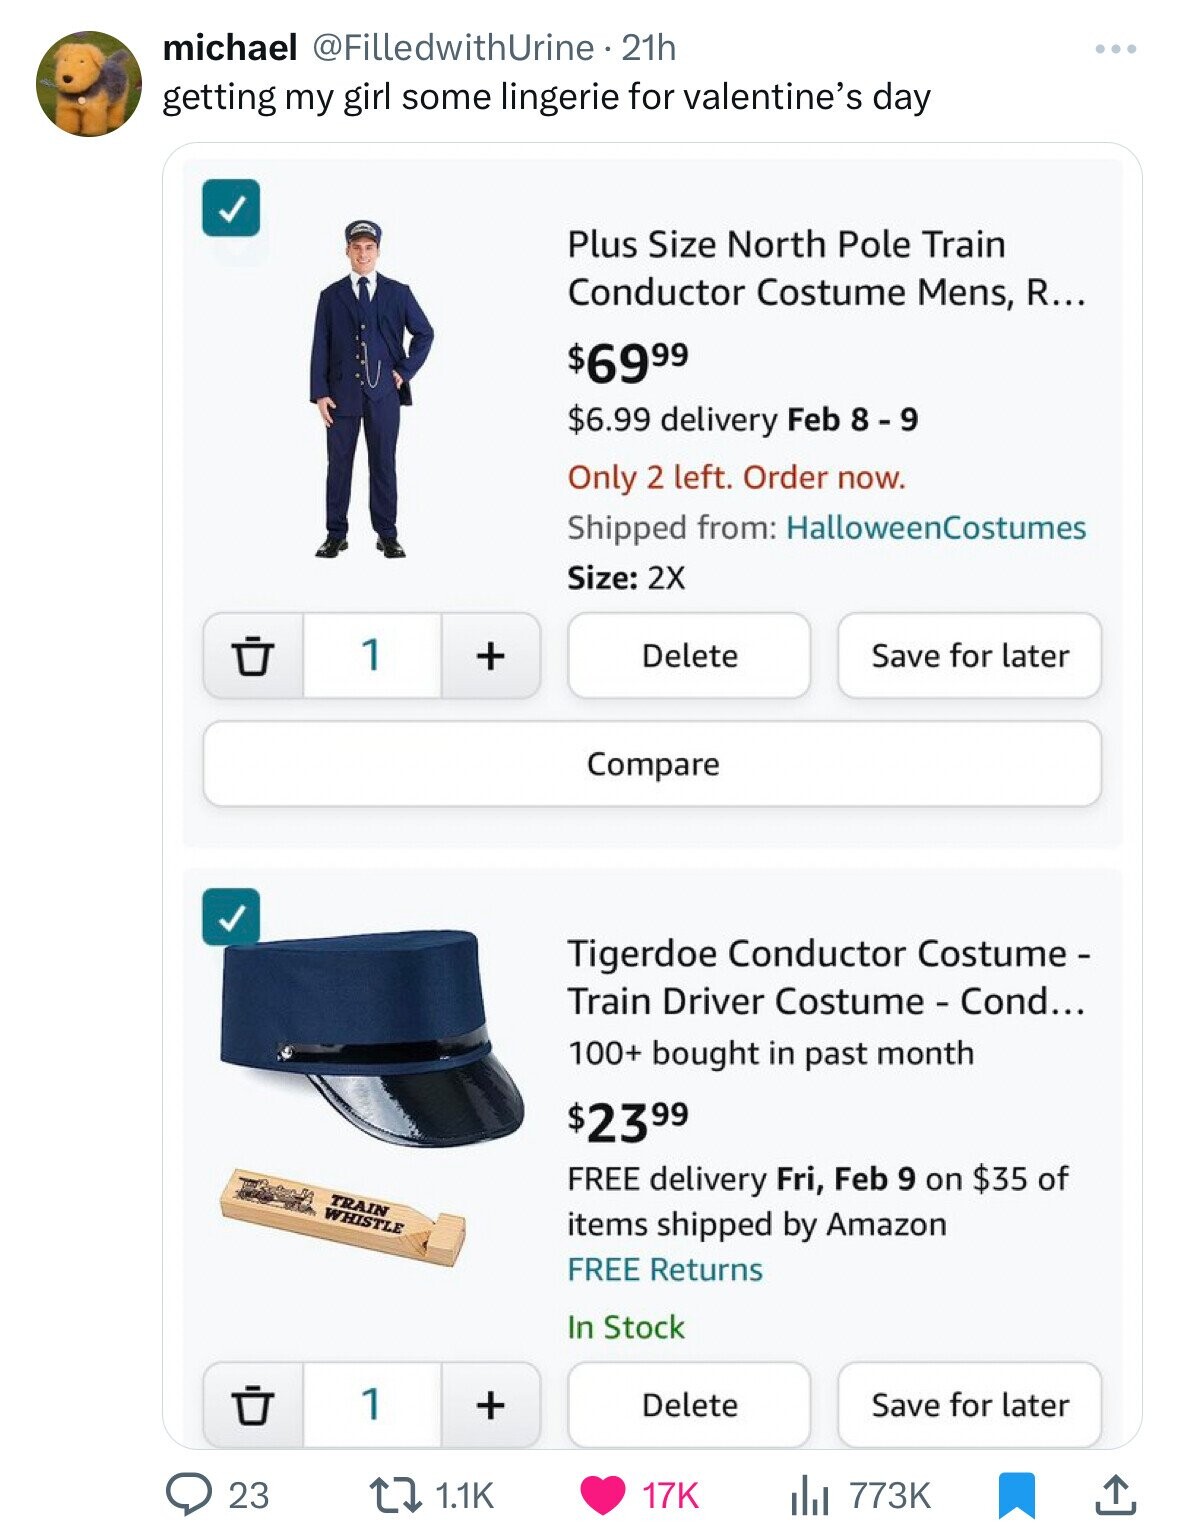 web page - michael 21h getting my girl some lingerie for valentine's day 23 1 1 Train Whistle 1 . Plus Size North Pole Train Conductor Costume Mens, R... $6999 $6.99 delivery Feb 8 9 Only 2 left. Order now. Shipped from Halloween Costumes Size 2X Delete C